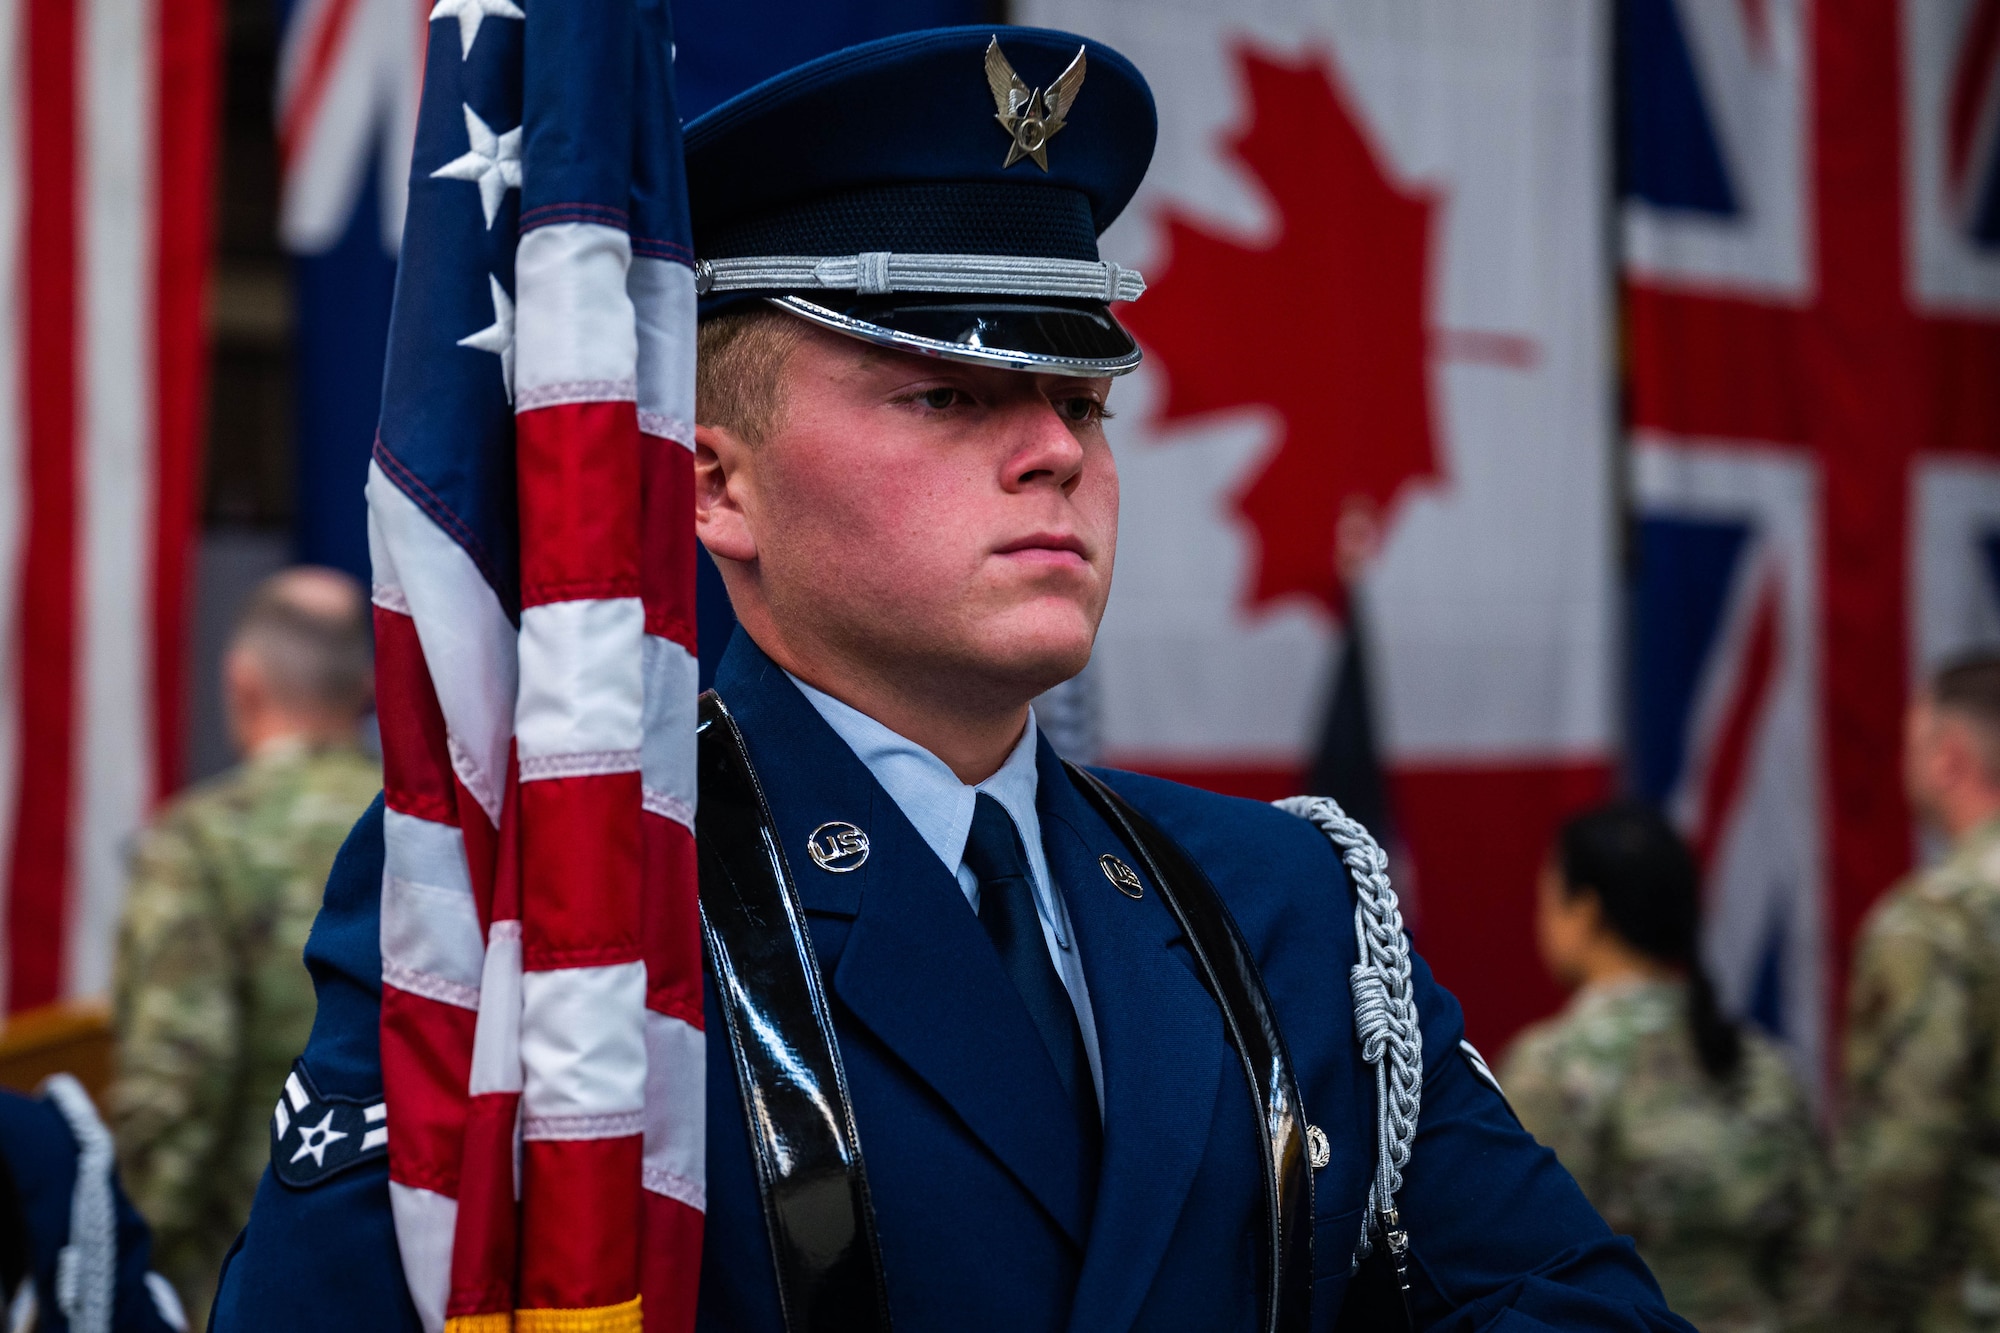 U.S. Air Force Airman 1st Class Avery Balaskovitz, member of the Vandenberg Space Force Base Honor Guard team and assigned to the 30th Security Forces Squadron, holds the American flag during the 18th Space Defense Squadron’s re-designation ceremony at Vandenberg SFB, Calif., April 13, 2022. The 18 SDS, previously 18th Space Control Squadron, provides standardized, accurate position and velocity information to satellite owners, operators, launch entities, and others, enabling responsible use of space and assisting spacefarers in avoiding collisions. (U.S. Space Force photo by Tech. Sgt. Luke Kitterman)